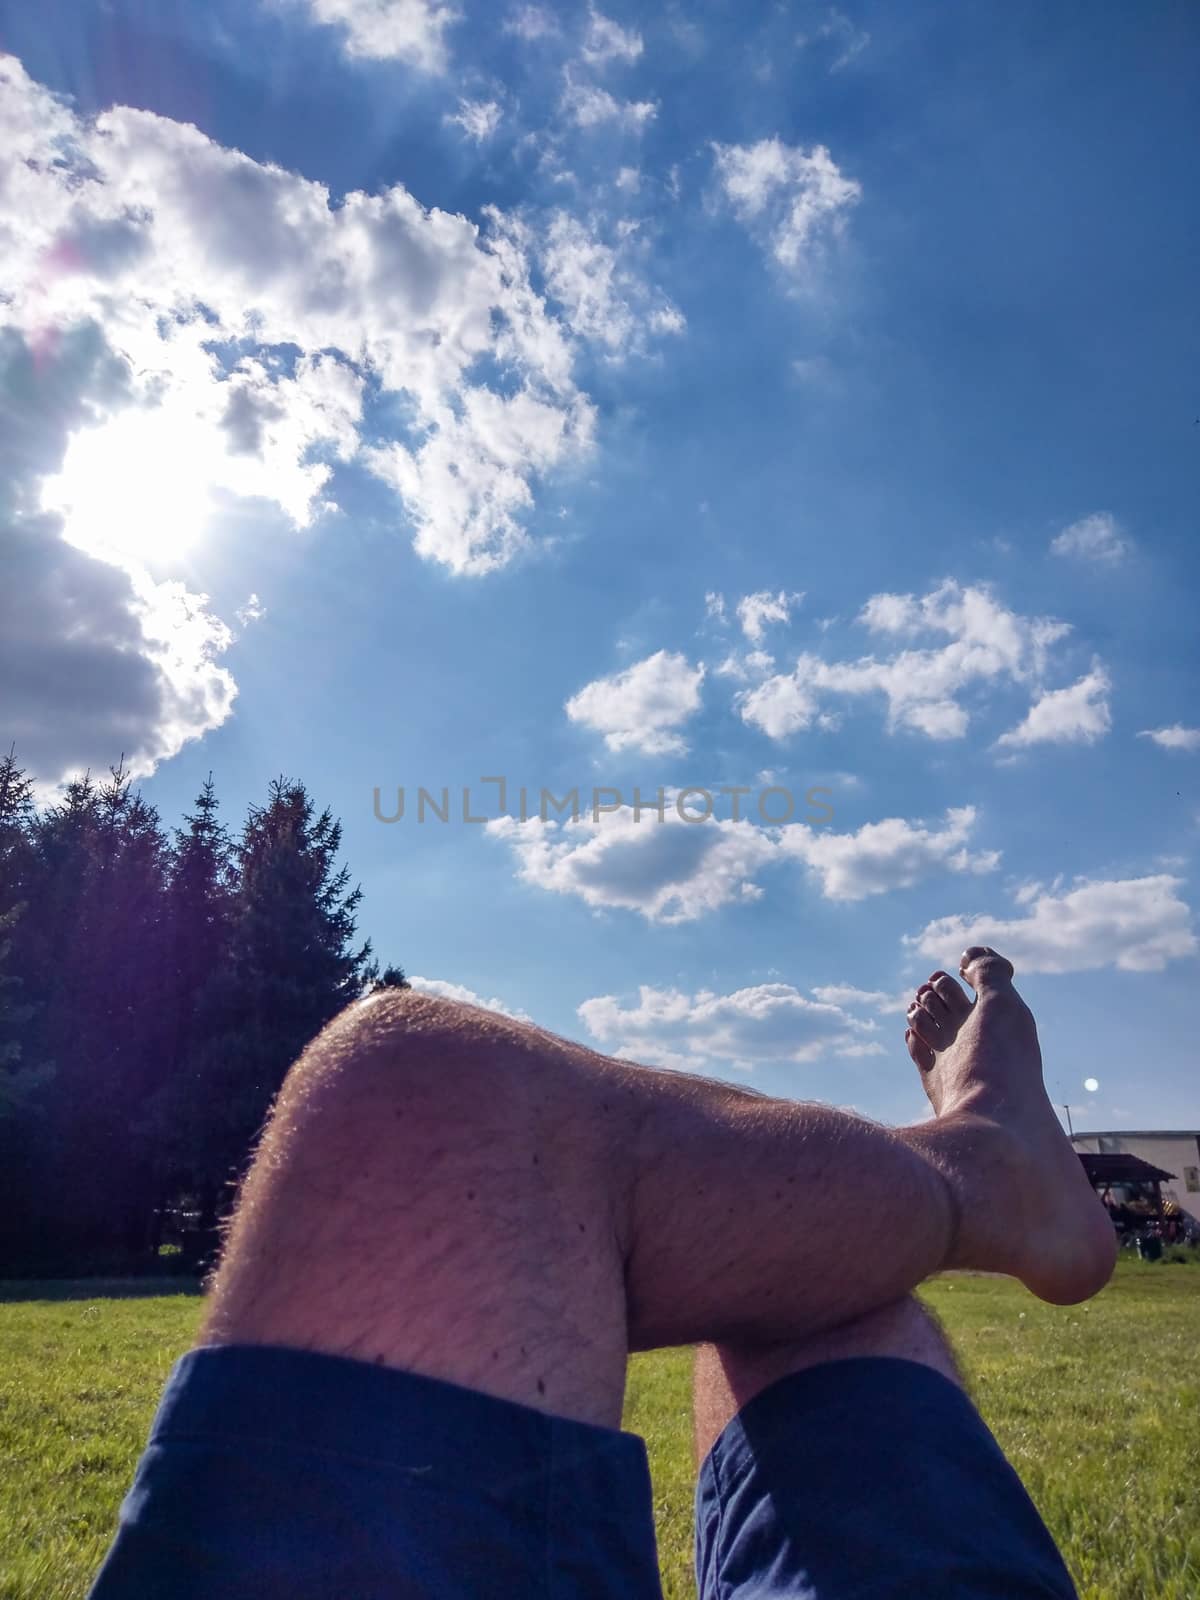 Feet of a man relaxing in shorts during a sunny day